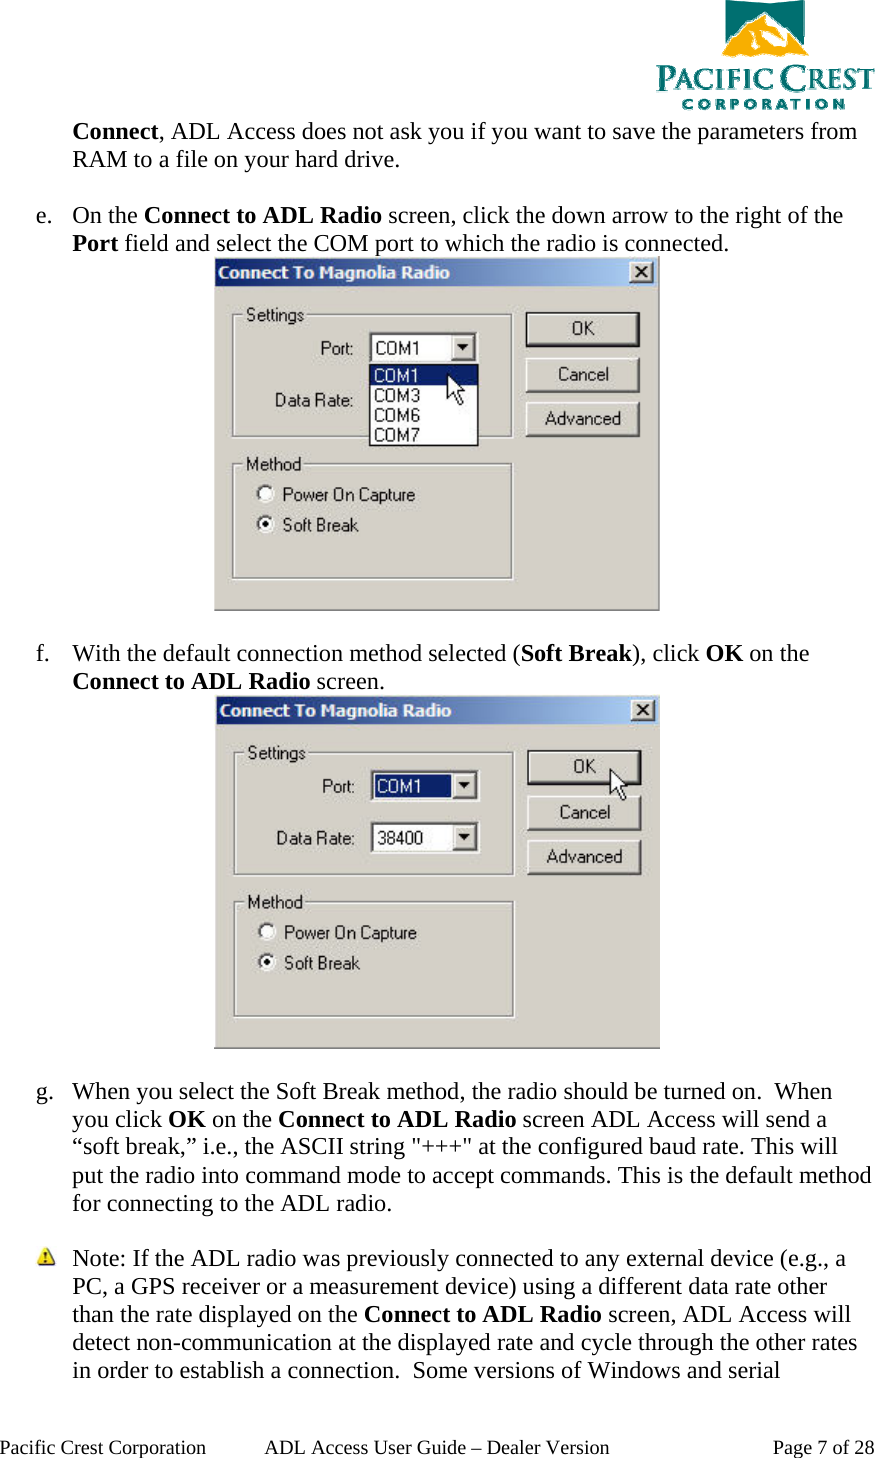  Pacific Crest Corporation  ADL Access User Guide – Dealer Version  Page 7 of 28 Connect, ADL Access does not ask you if you want to save the parameters from RAM to a file on your hard drive.   e. On the Connect to ADL Radio screen, click the down arrow to the right of the Port field and select the COM port to which the radio is connected.   f. With the default connection method selected (Soft Break), click OK on the Connect to ADL Radio screen.   g. When you select the Soft Break method, the radio should be turned on.  When you click OK on the Connect to ADL Radio screen ADL Access will send a “soft break,” i.e., the ASCII string &quot;+++&quot; at the configured baud rate. This will put the radio into command mode to accept commands. This is the default method for connecting to the ADL radio.   Note: If the ADL radio was previously connected to any external device (e.g., a PC, a GPS receiver or a measurement device) using a different data rate other than the rate displayed on the Connect to ADL Radio screen, ADL Access will detect non-communication at the displayed rate and cycle through the other rates in order to establish a connection.  Some versions of Windows and serial 